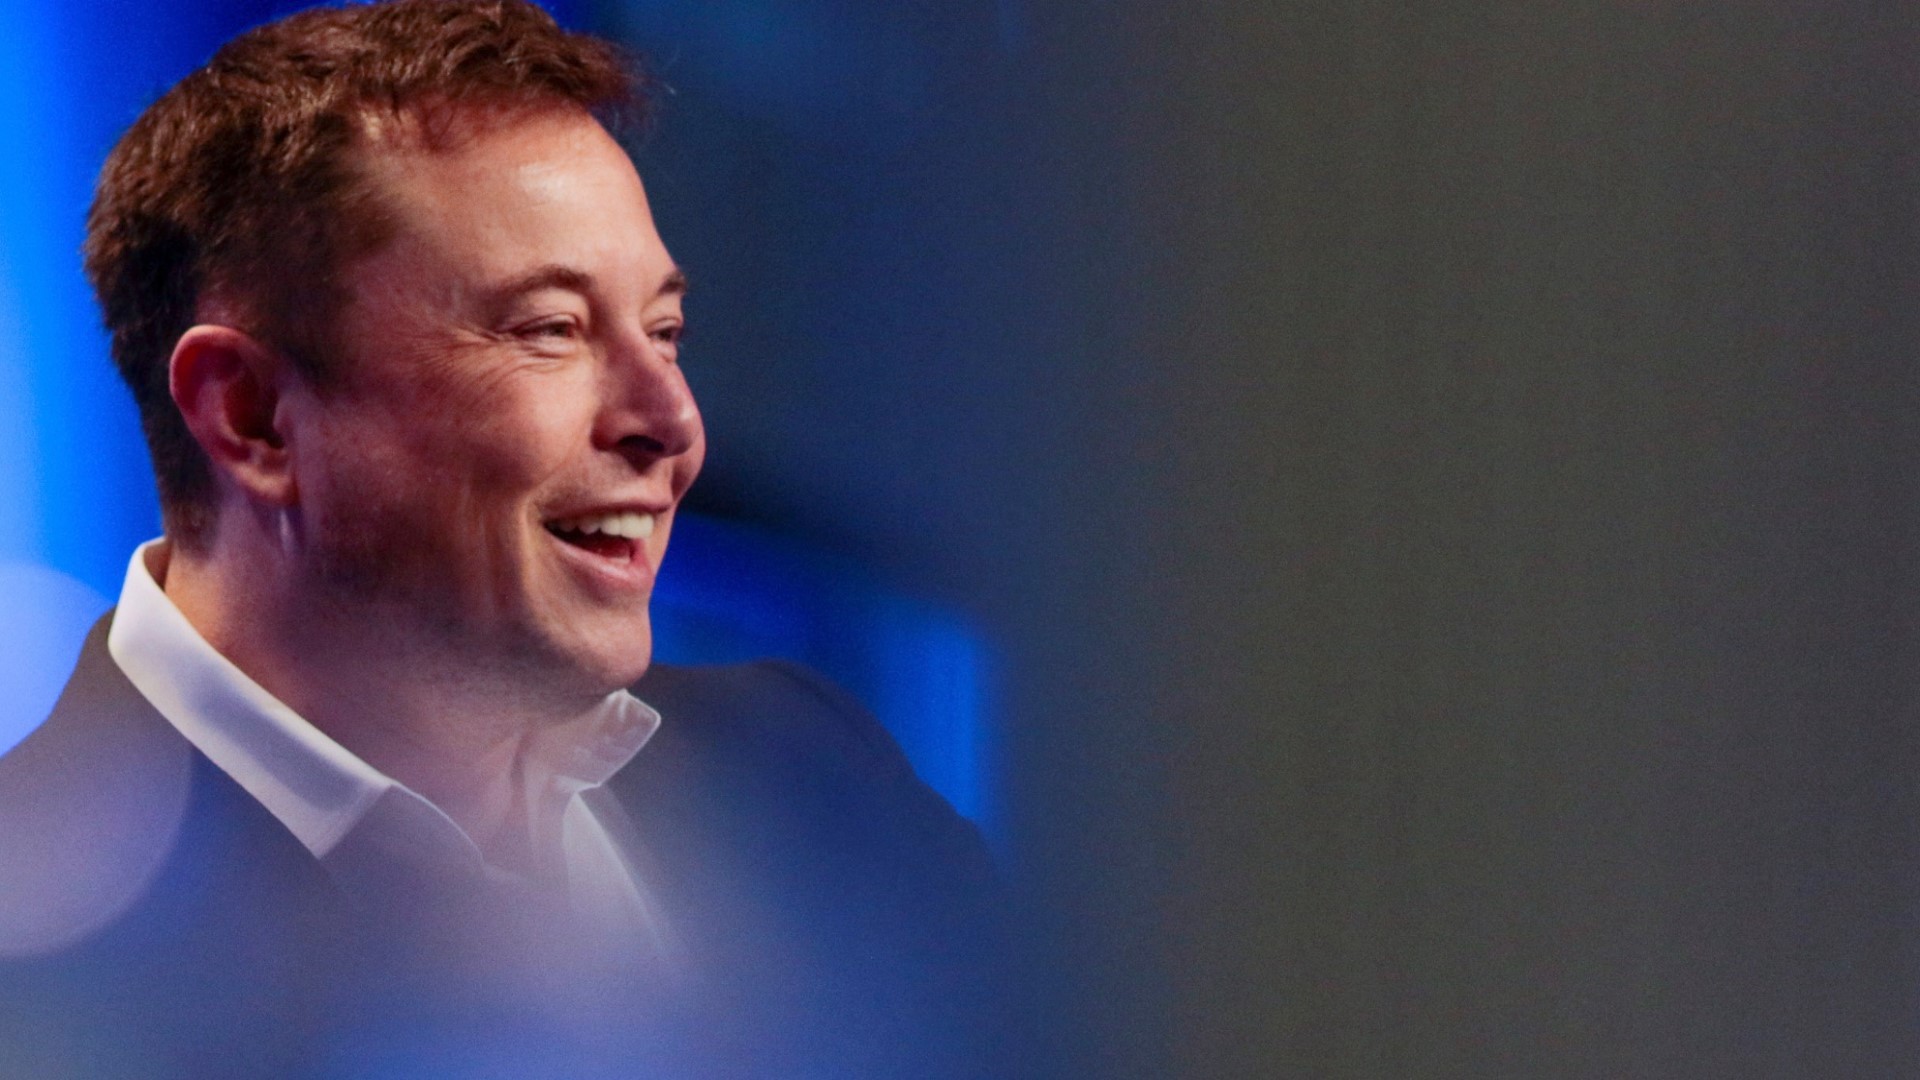 Elon Musk is funding a carbon-capture competition, saying 'time is of the essence.'